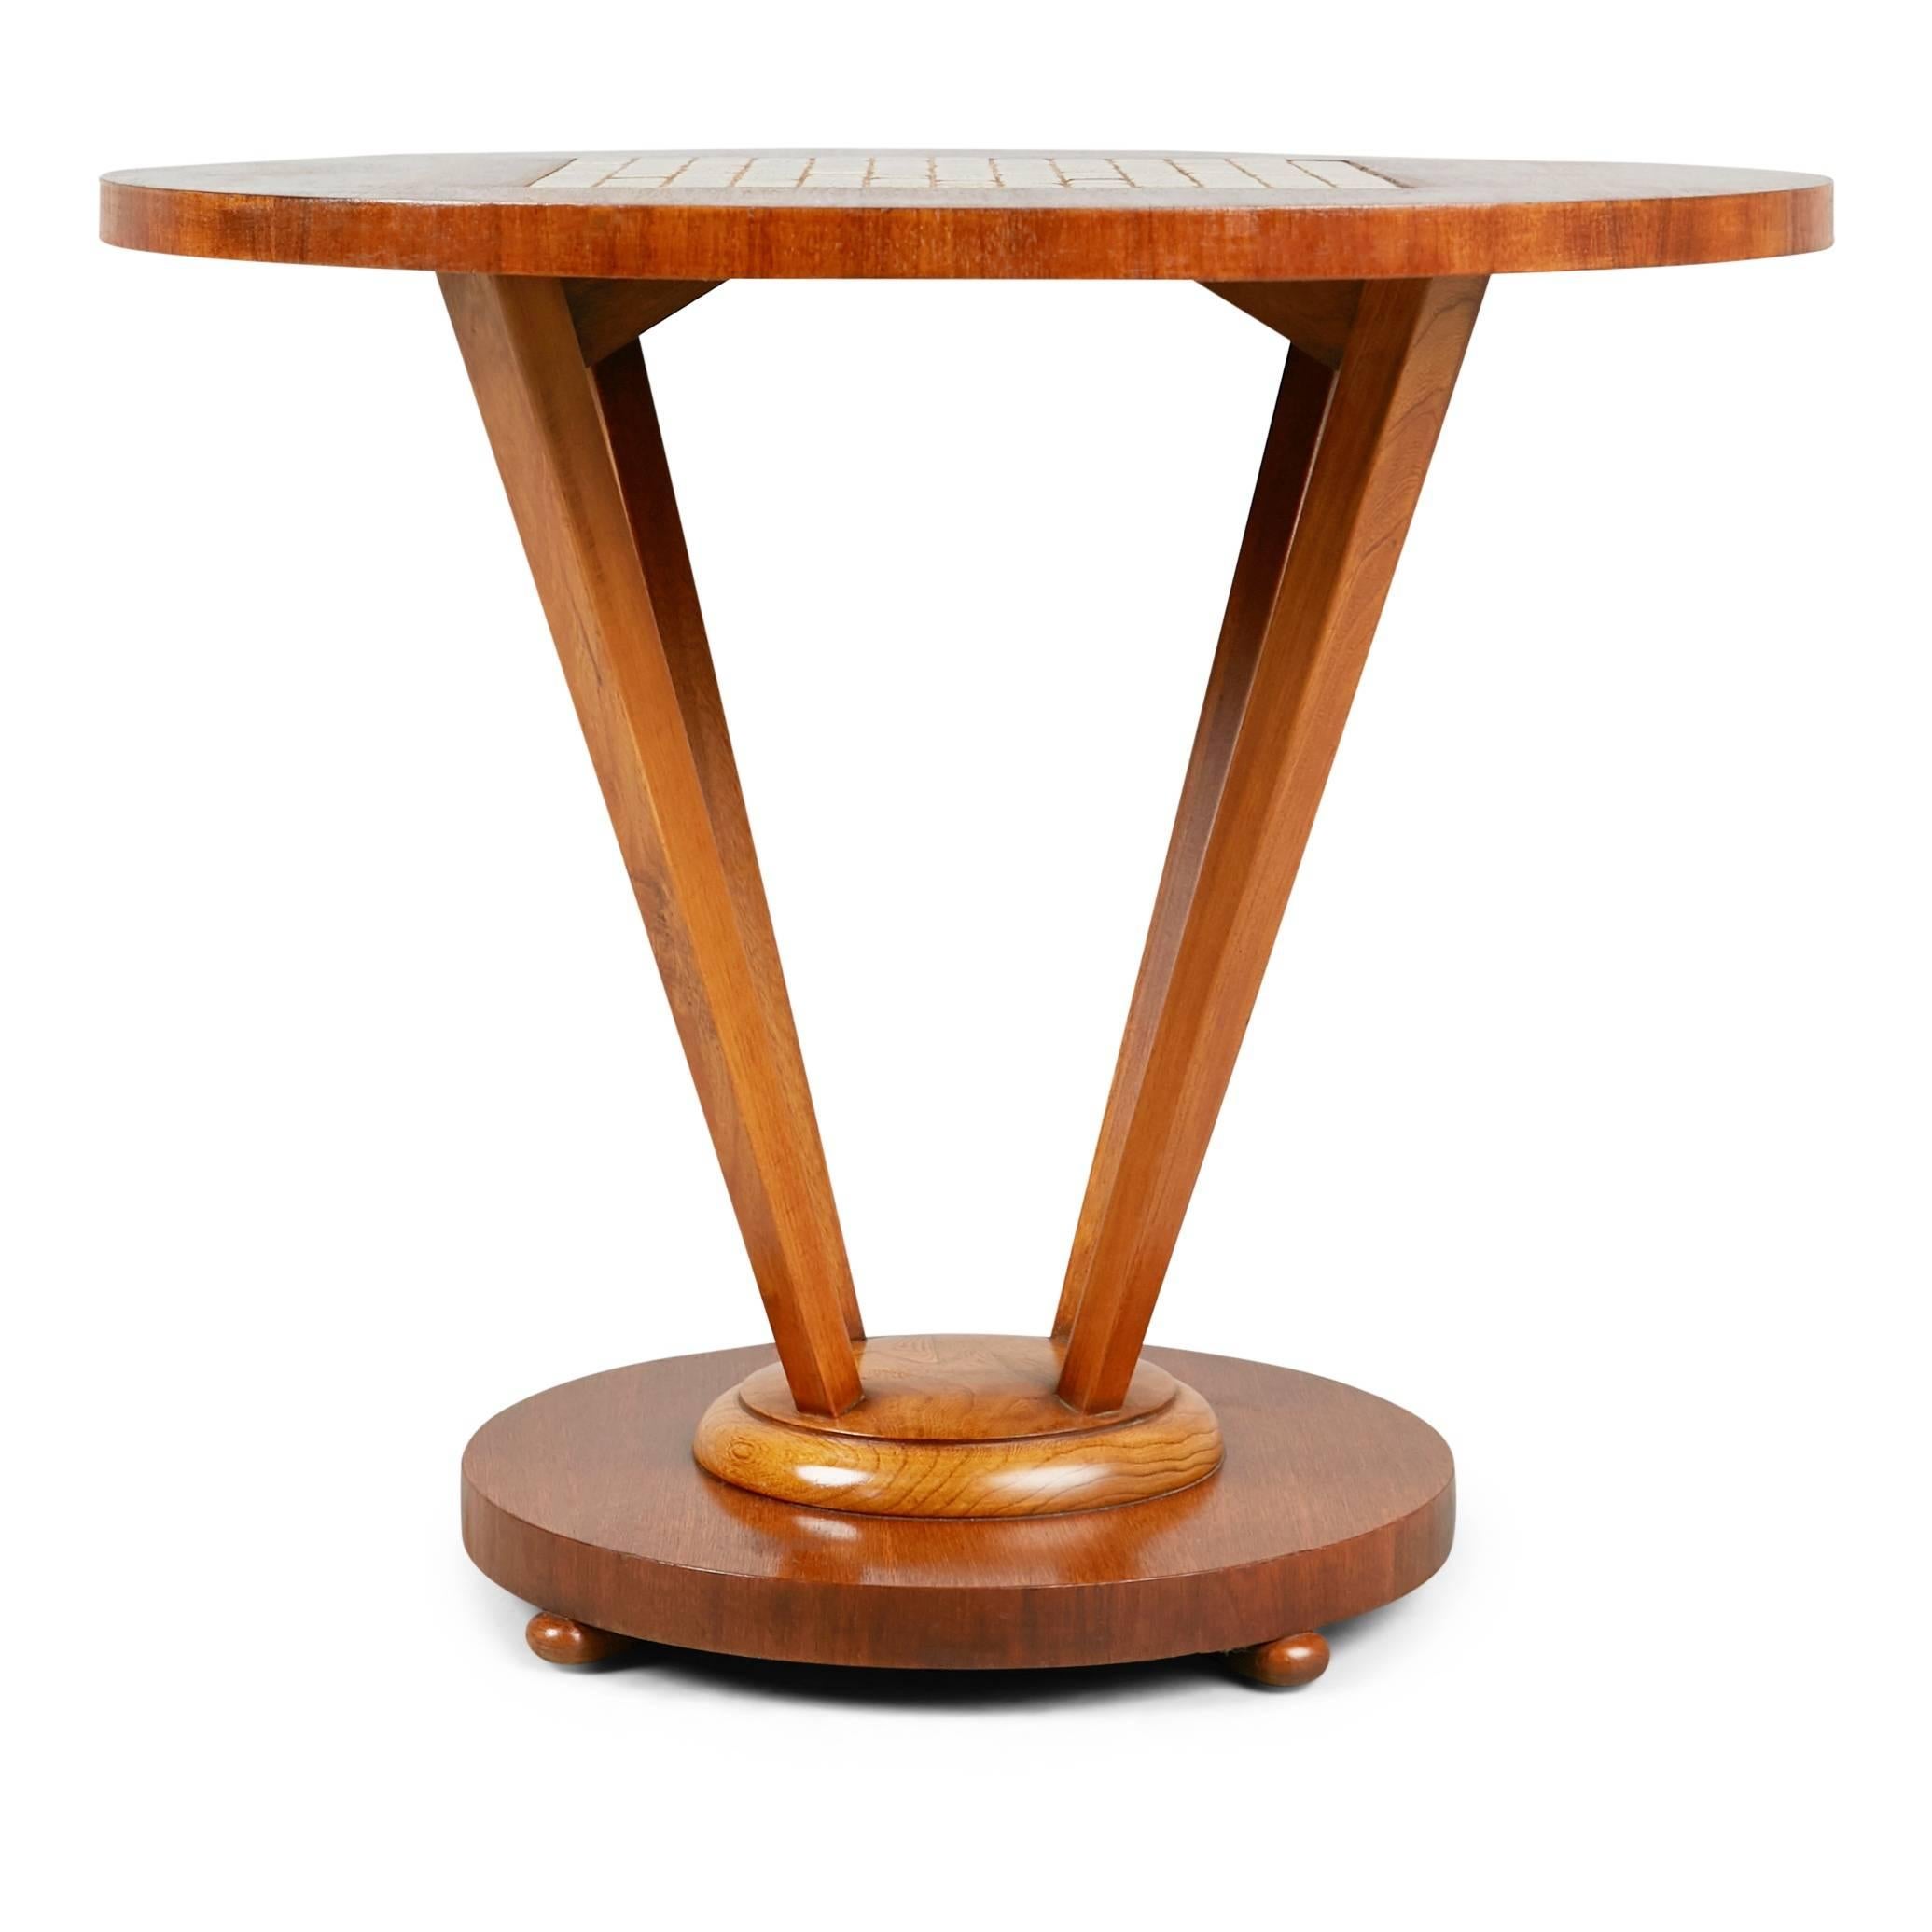 American Walnut Tile Detail Mid-Century Modern Occasional Table by Lane, circa 1960